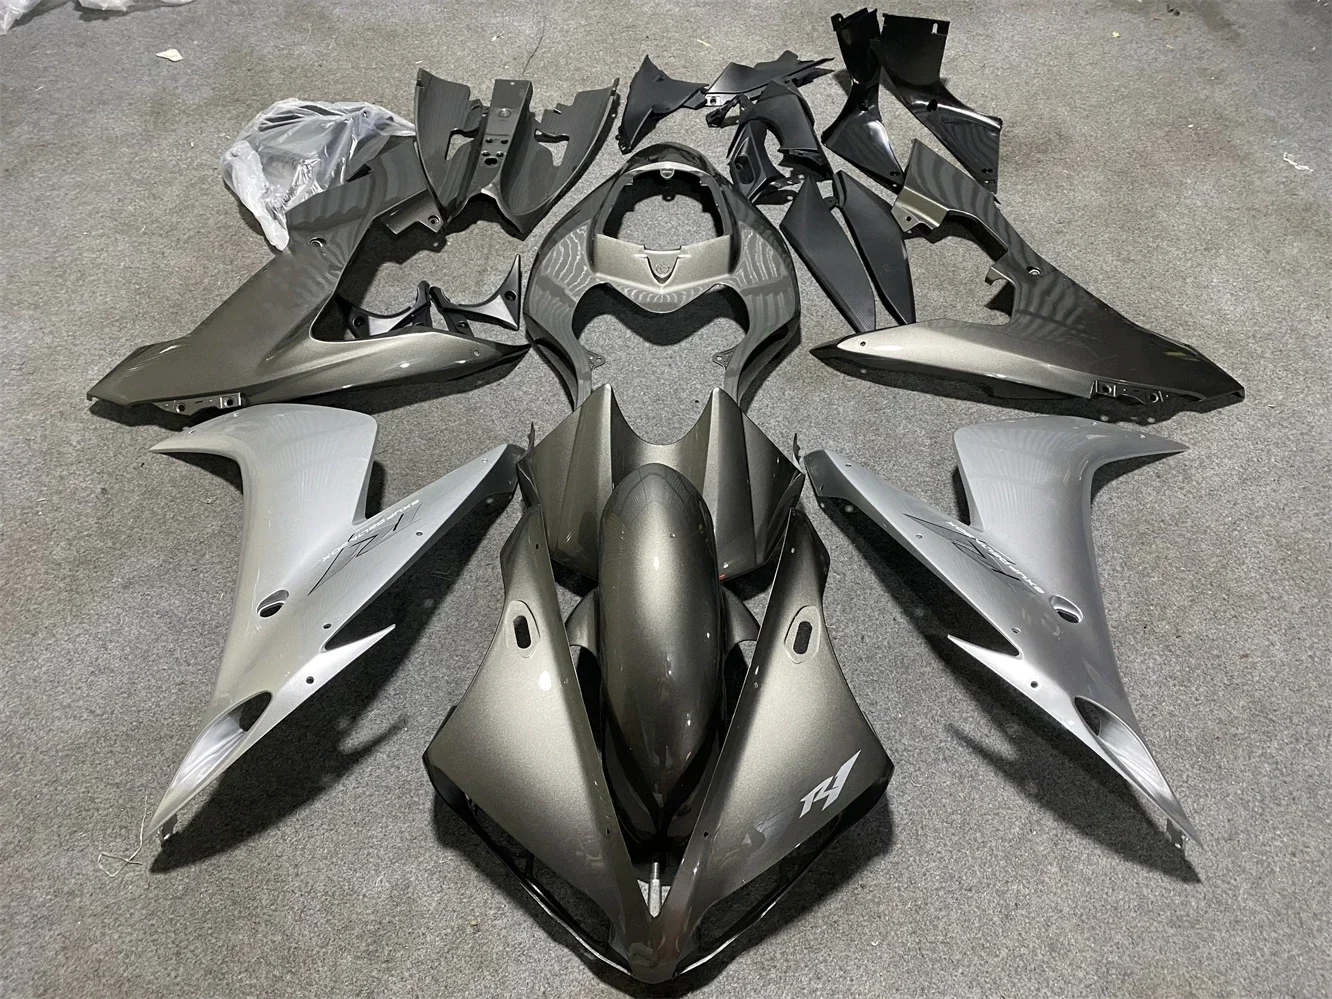 

Motorcycle Fairing Set Body Kit Plastic For Yamaha R1 YZFR1 YZF1000 2004 2005 2006 Accessories Injection Bodywork silvery